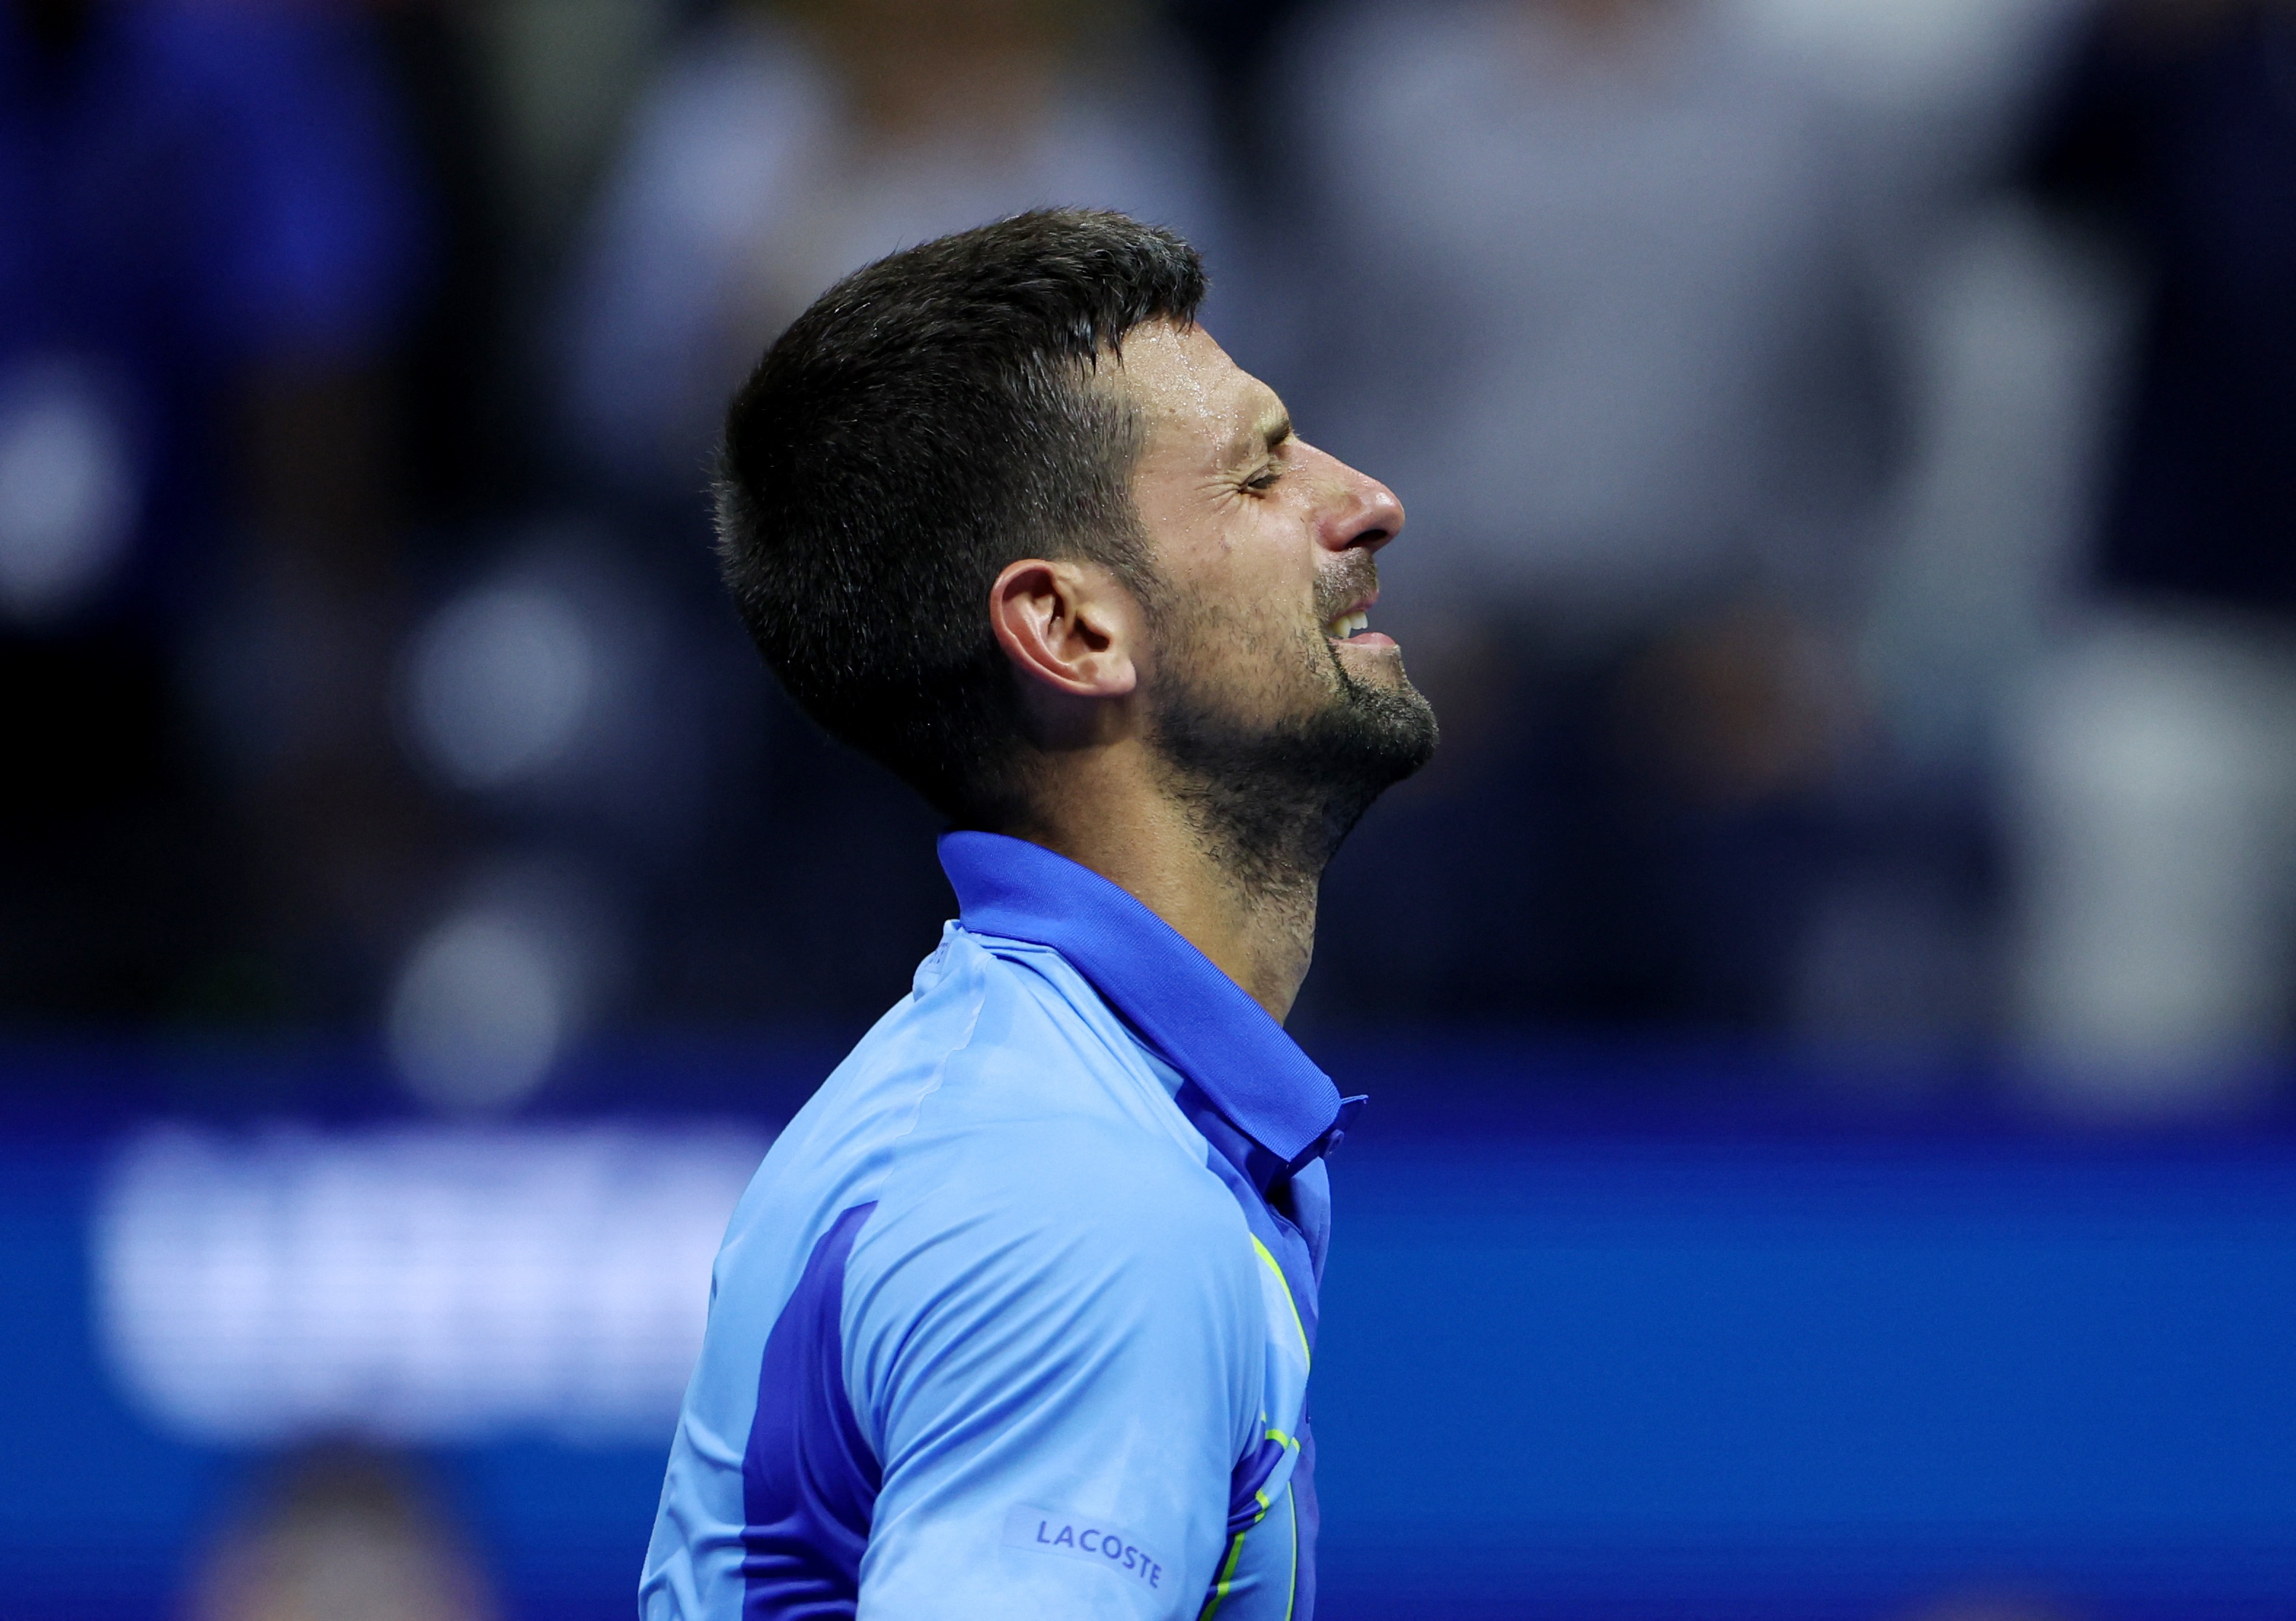 Djokovic wins US Open for record equalling 24th Grand Slam Reuters